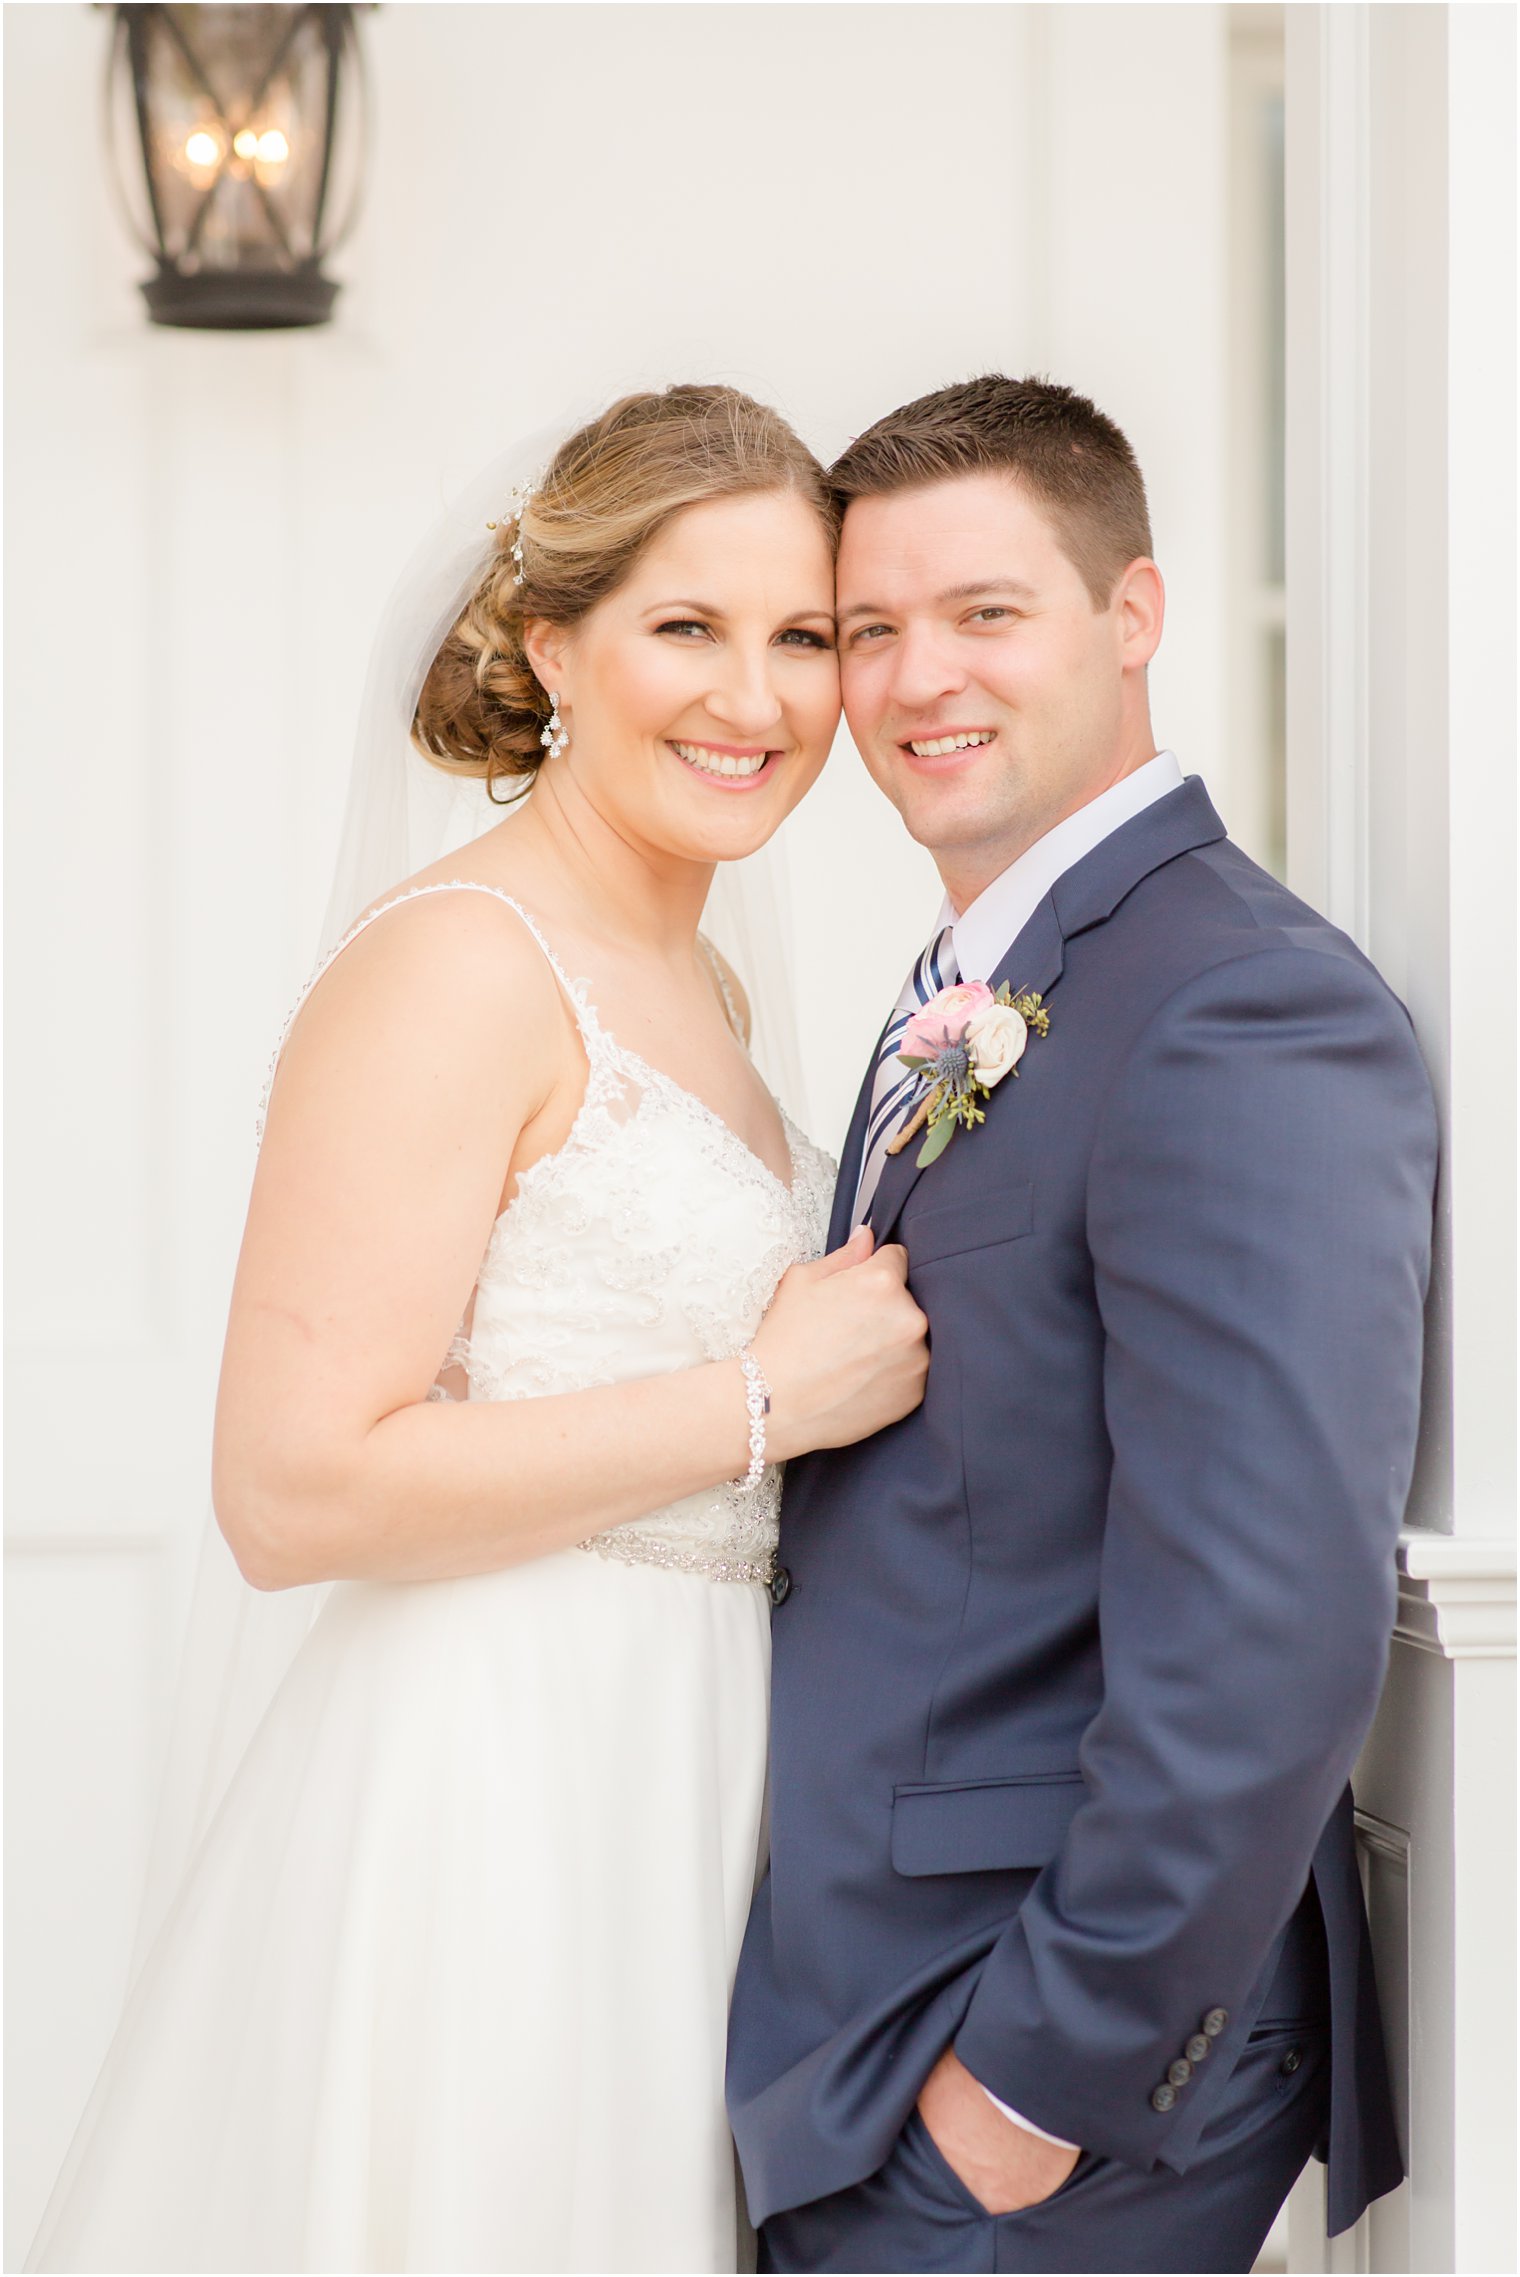 Classic bride and groom photo at The Mill Lakeside Manor Wedding